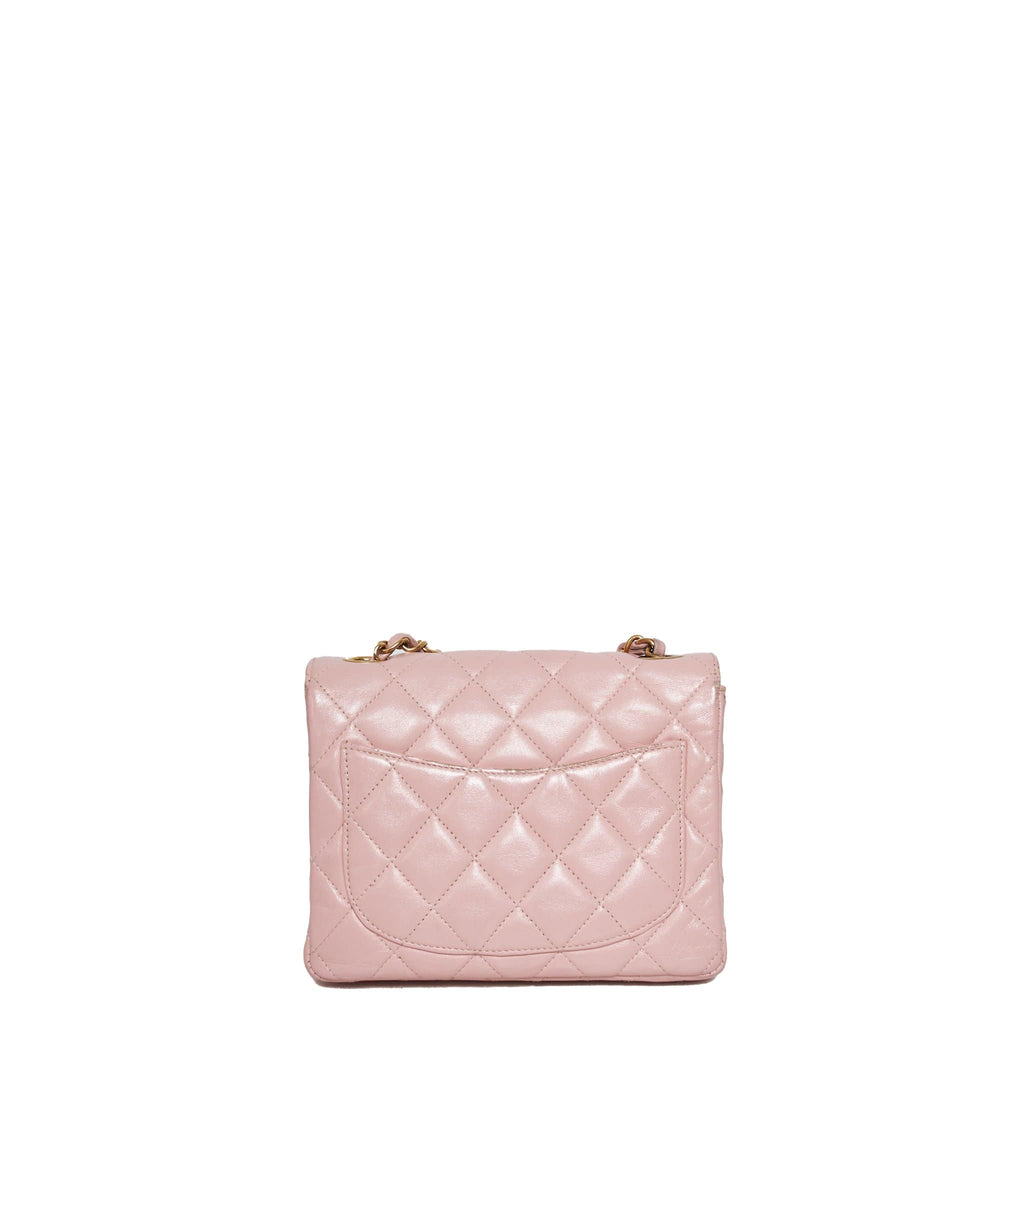 Authentic Second Hand Chanel Baby Pink Jersey Small Classic Flap Bag  PSS05100374  THE FIFTH COLLECTION